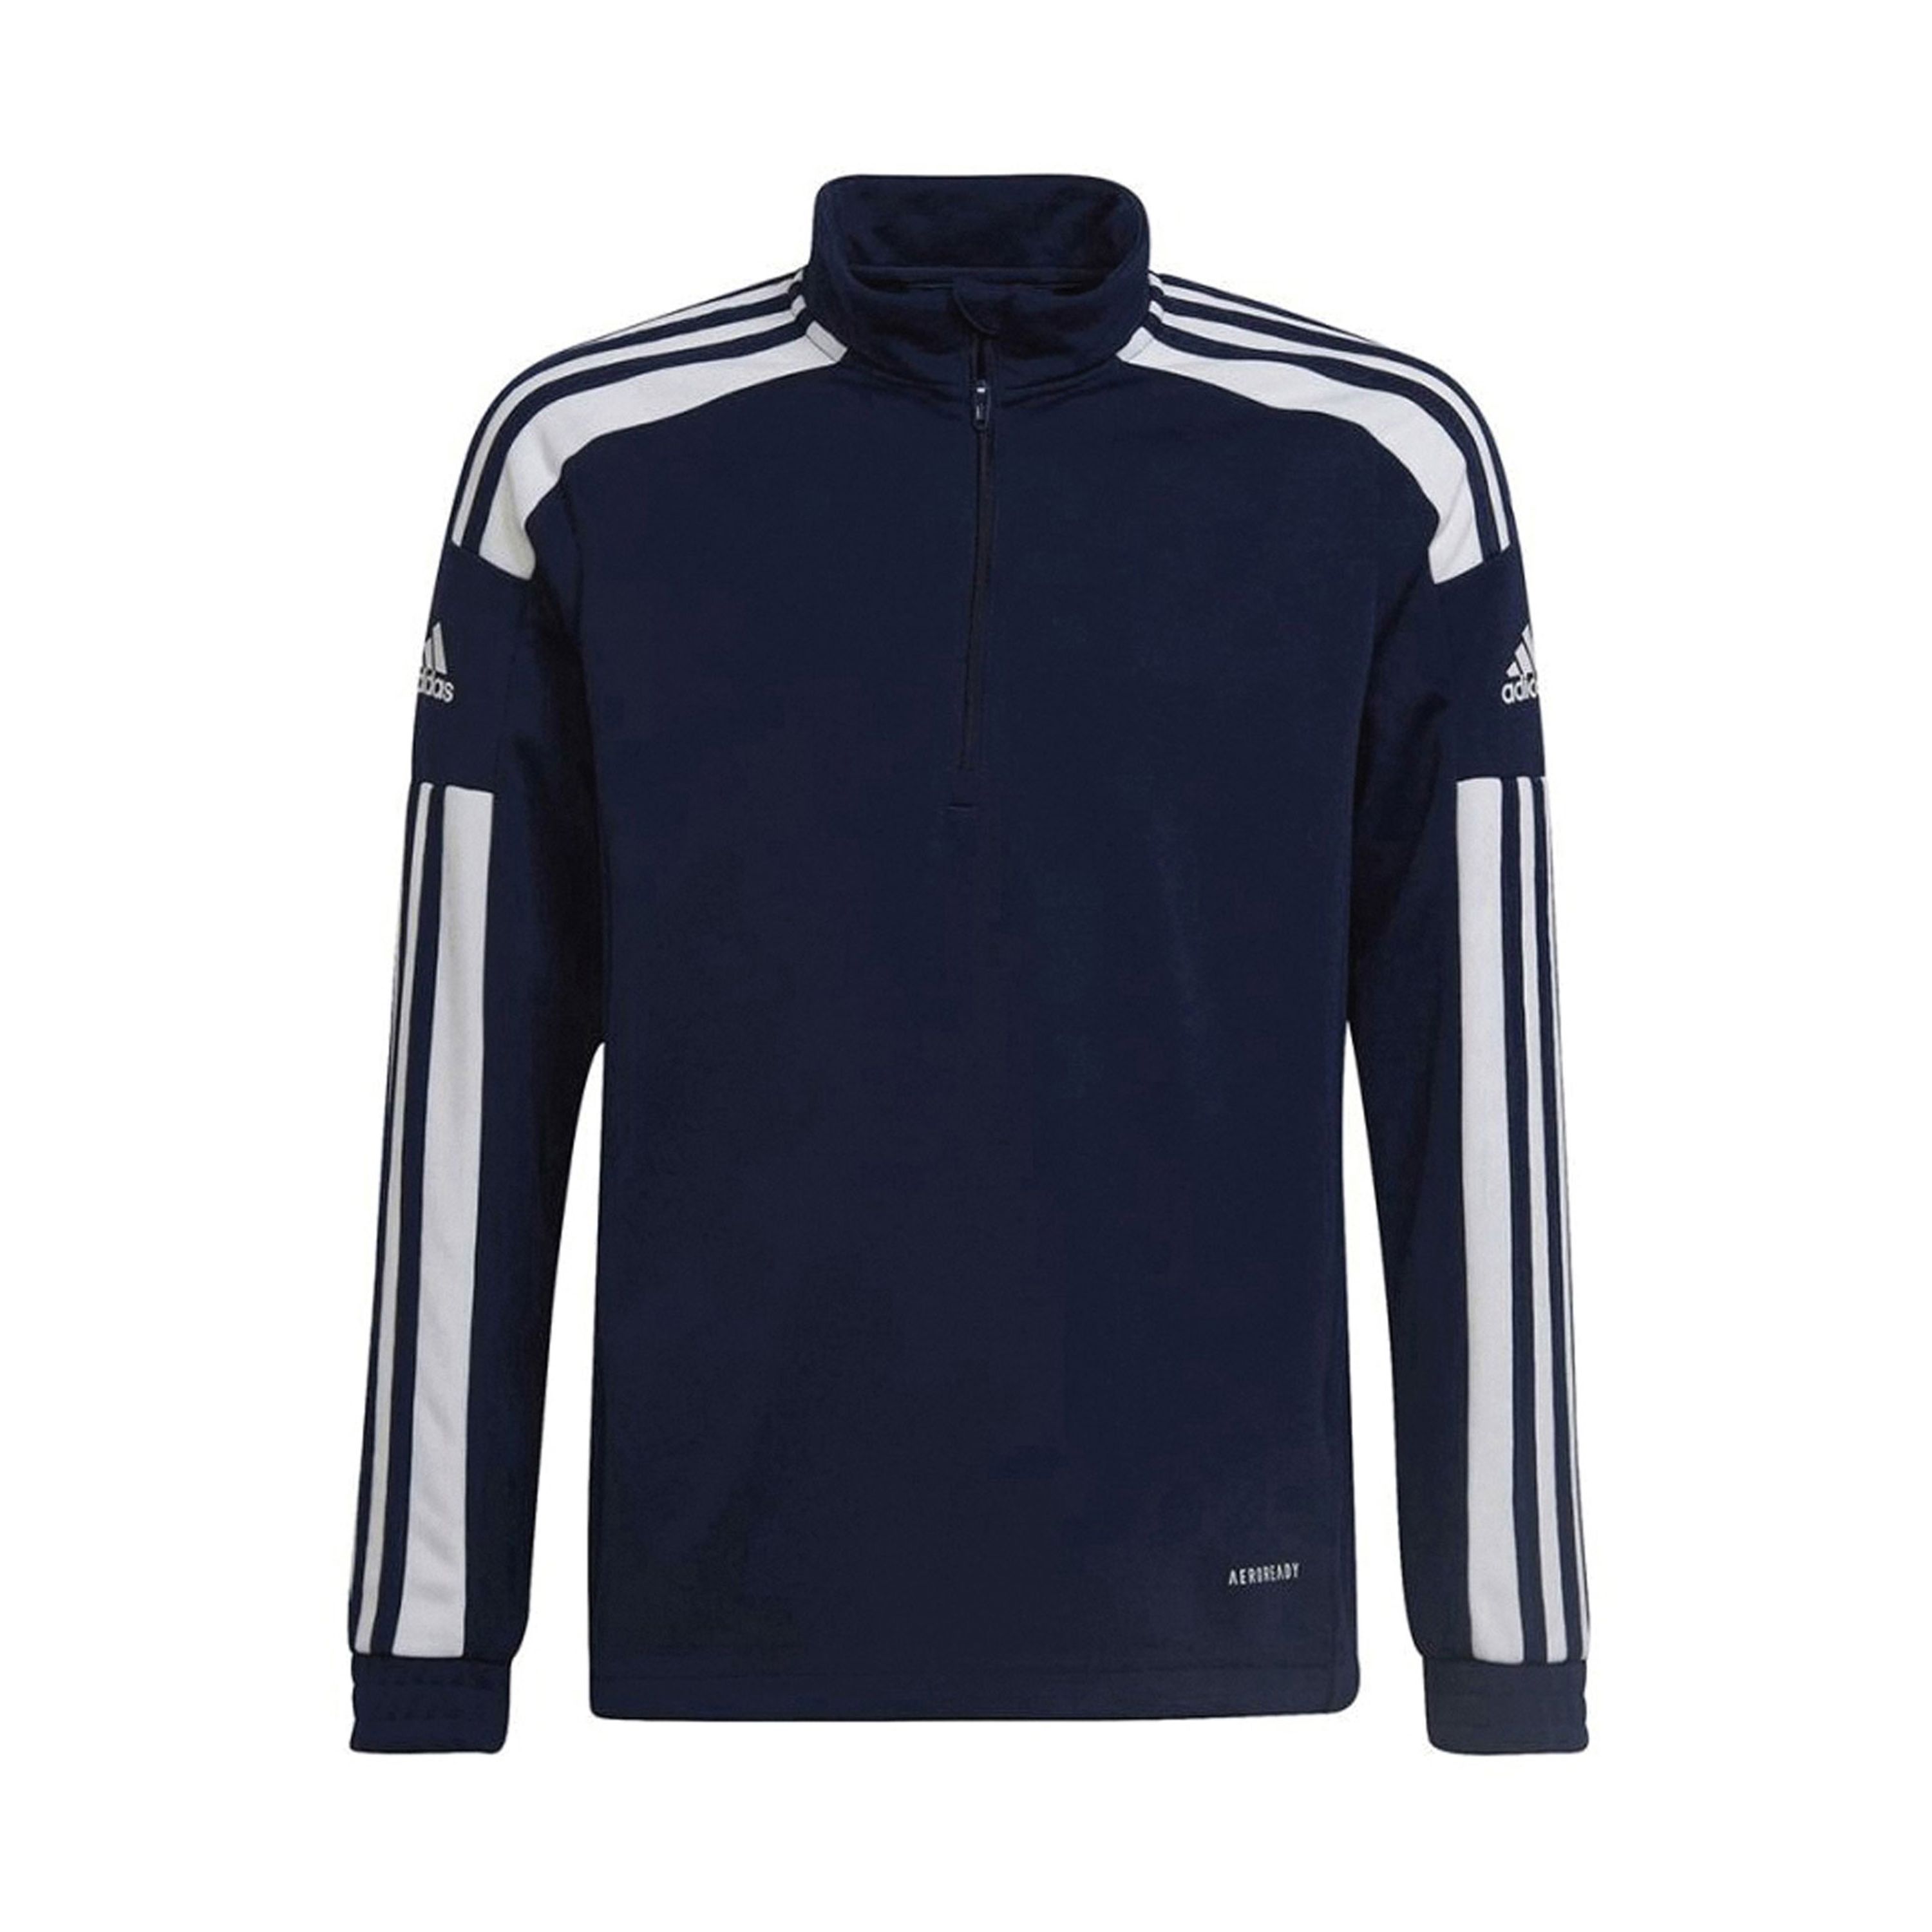 Adidas Perfor ce Junior sportpully donkerblauw wit Sportsweater Polyester Opstaande kraag 164